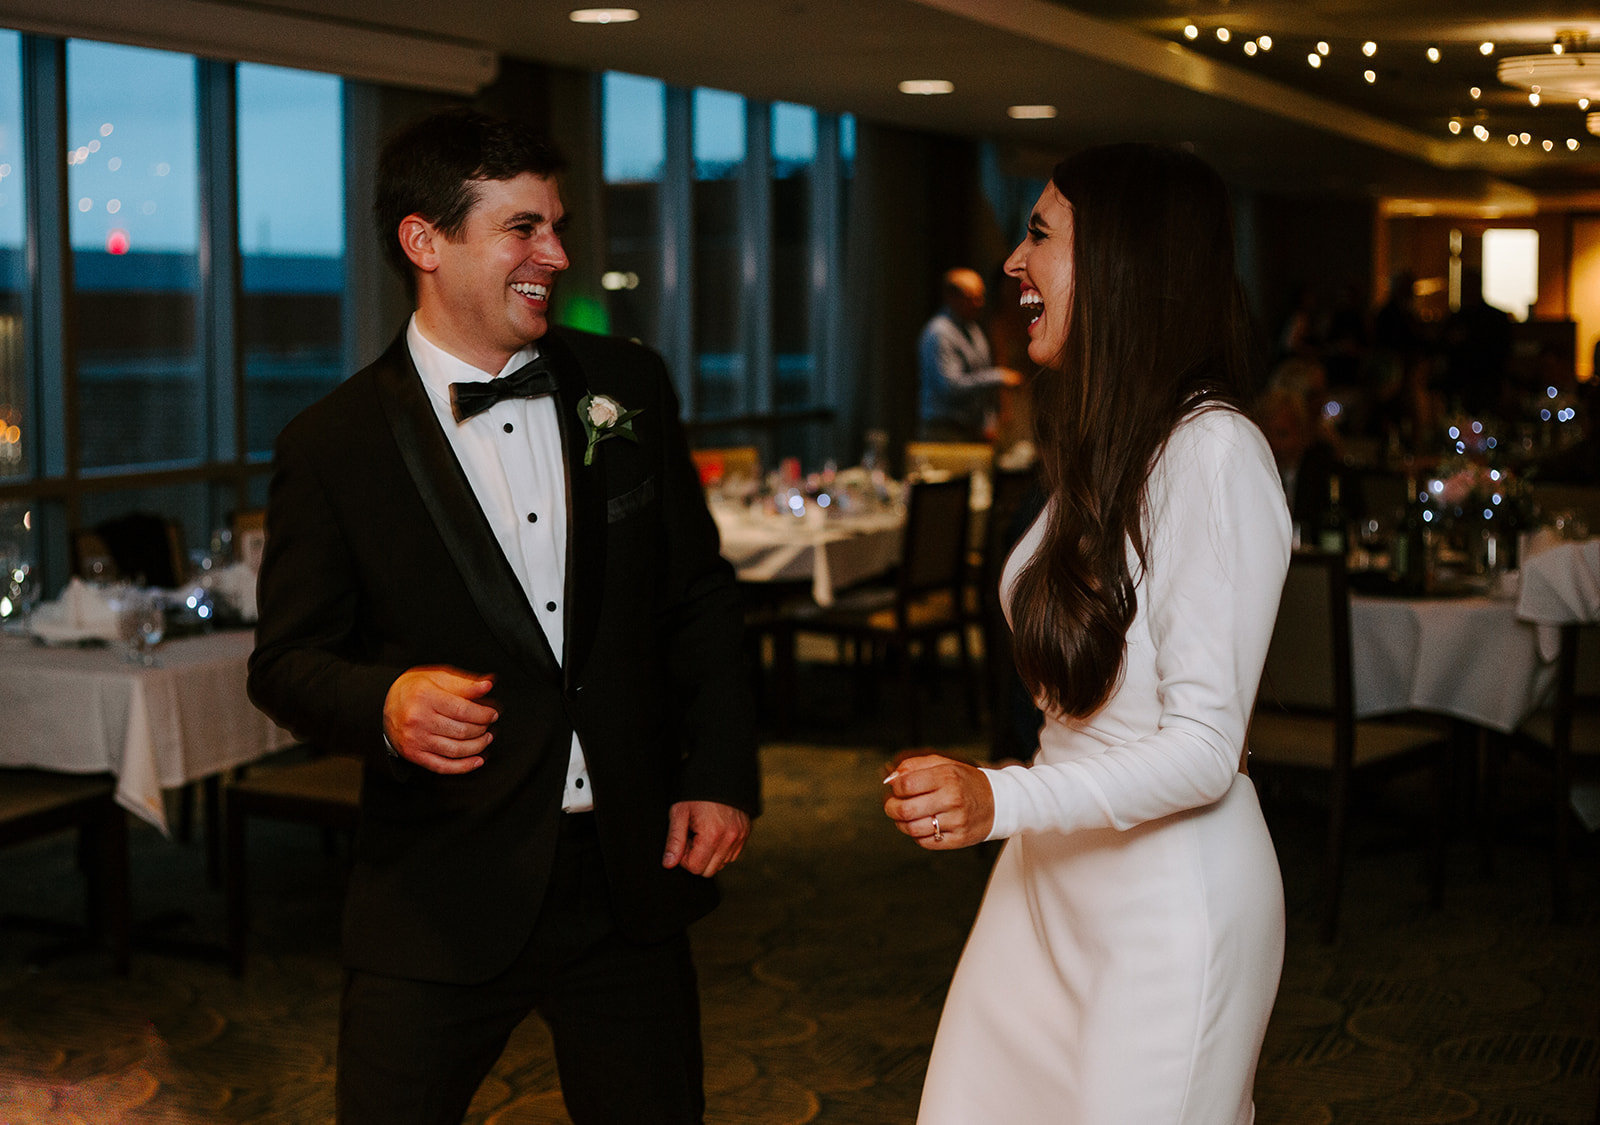 Bride and groom dancing together during their Minneapolis wedding reception